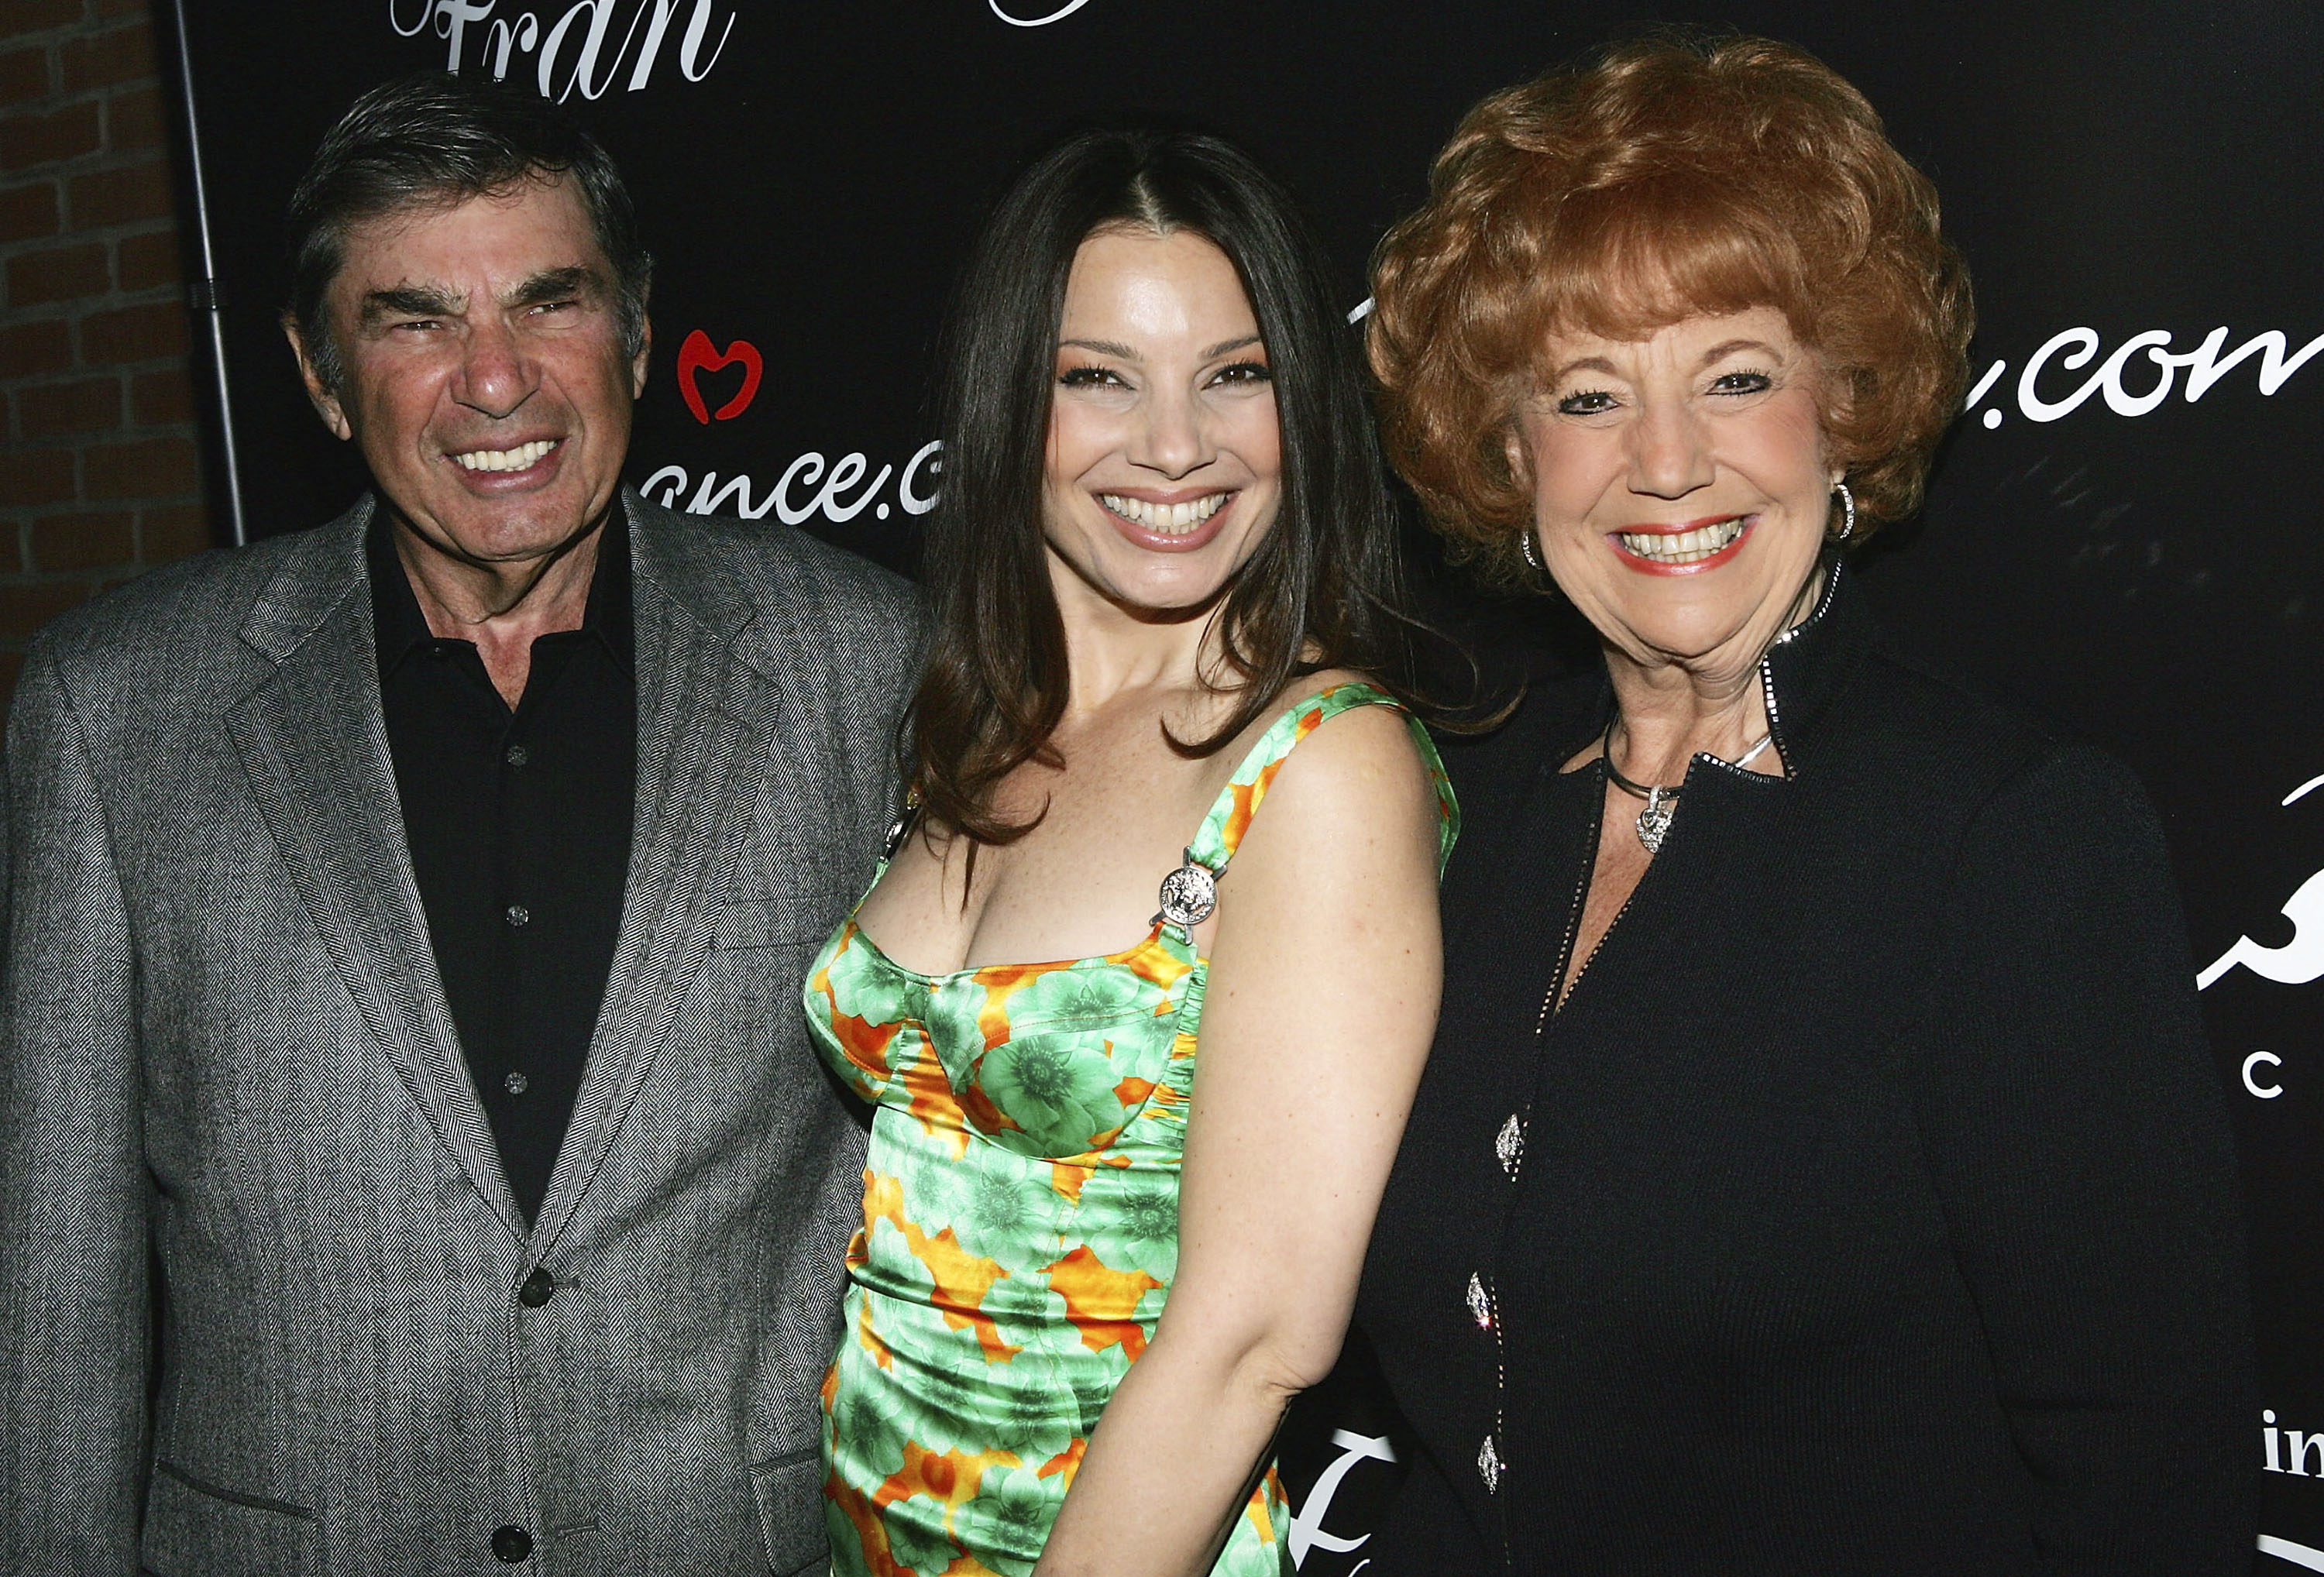 Morty, Sylvia, and Fran Drescher at a premiere party for the TV series "Living With Fran" at Cain Lounge in New York City on April 8, 2005. | Source: Getty Images